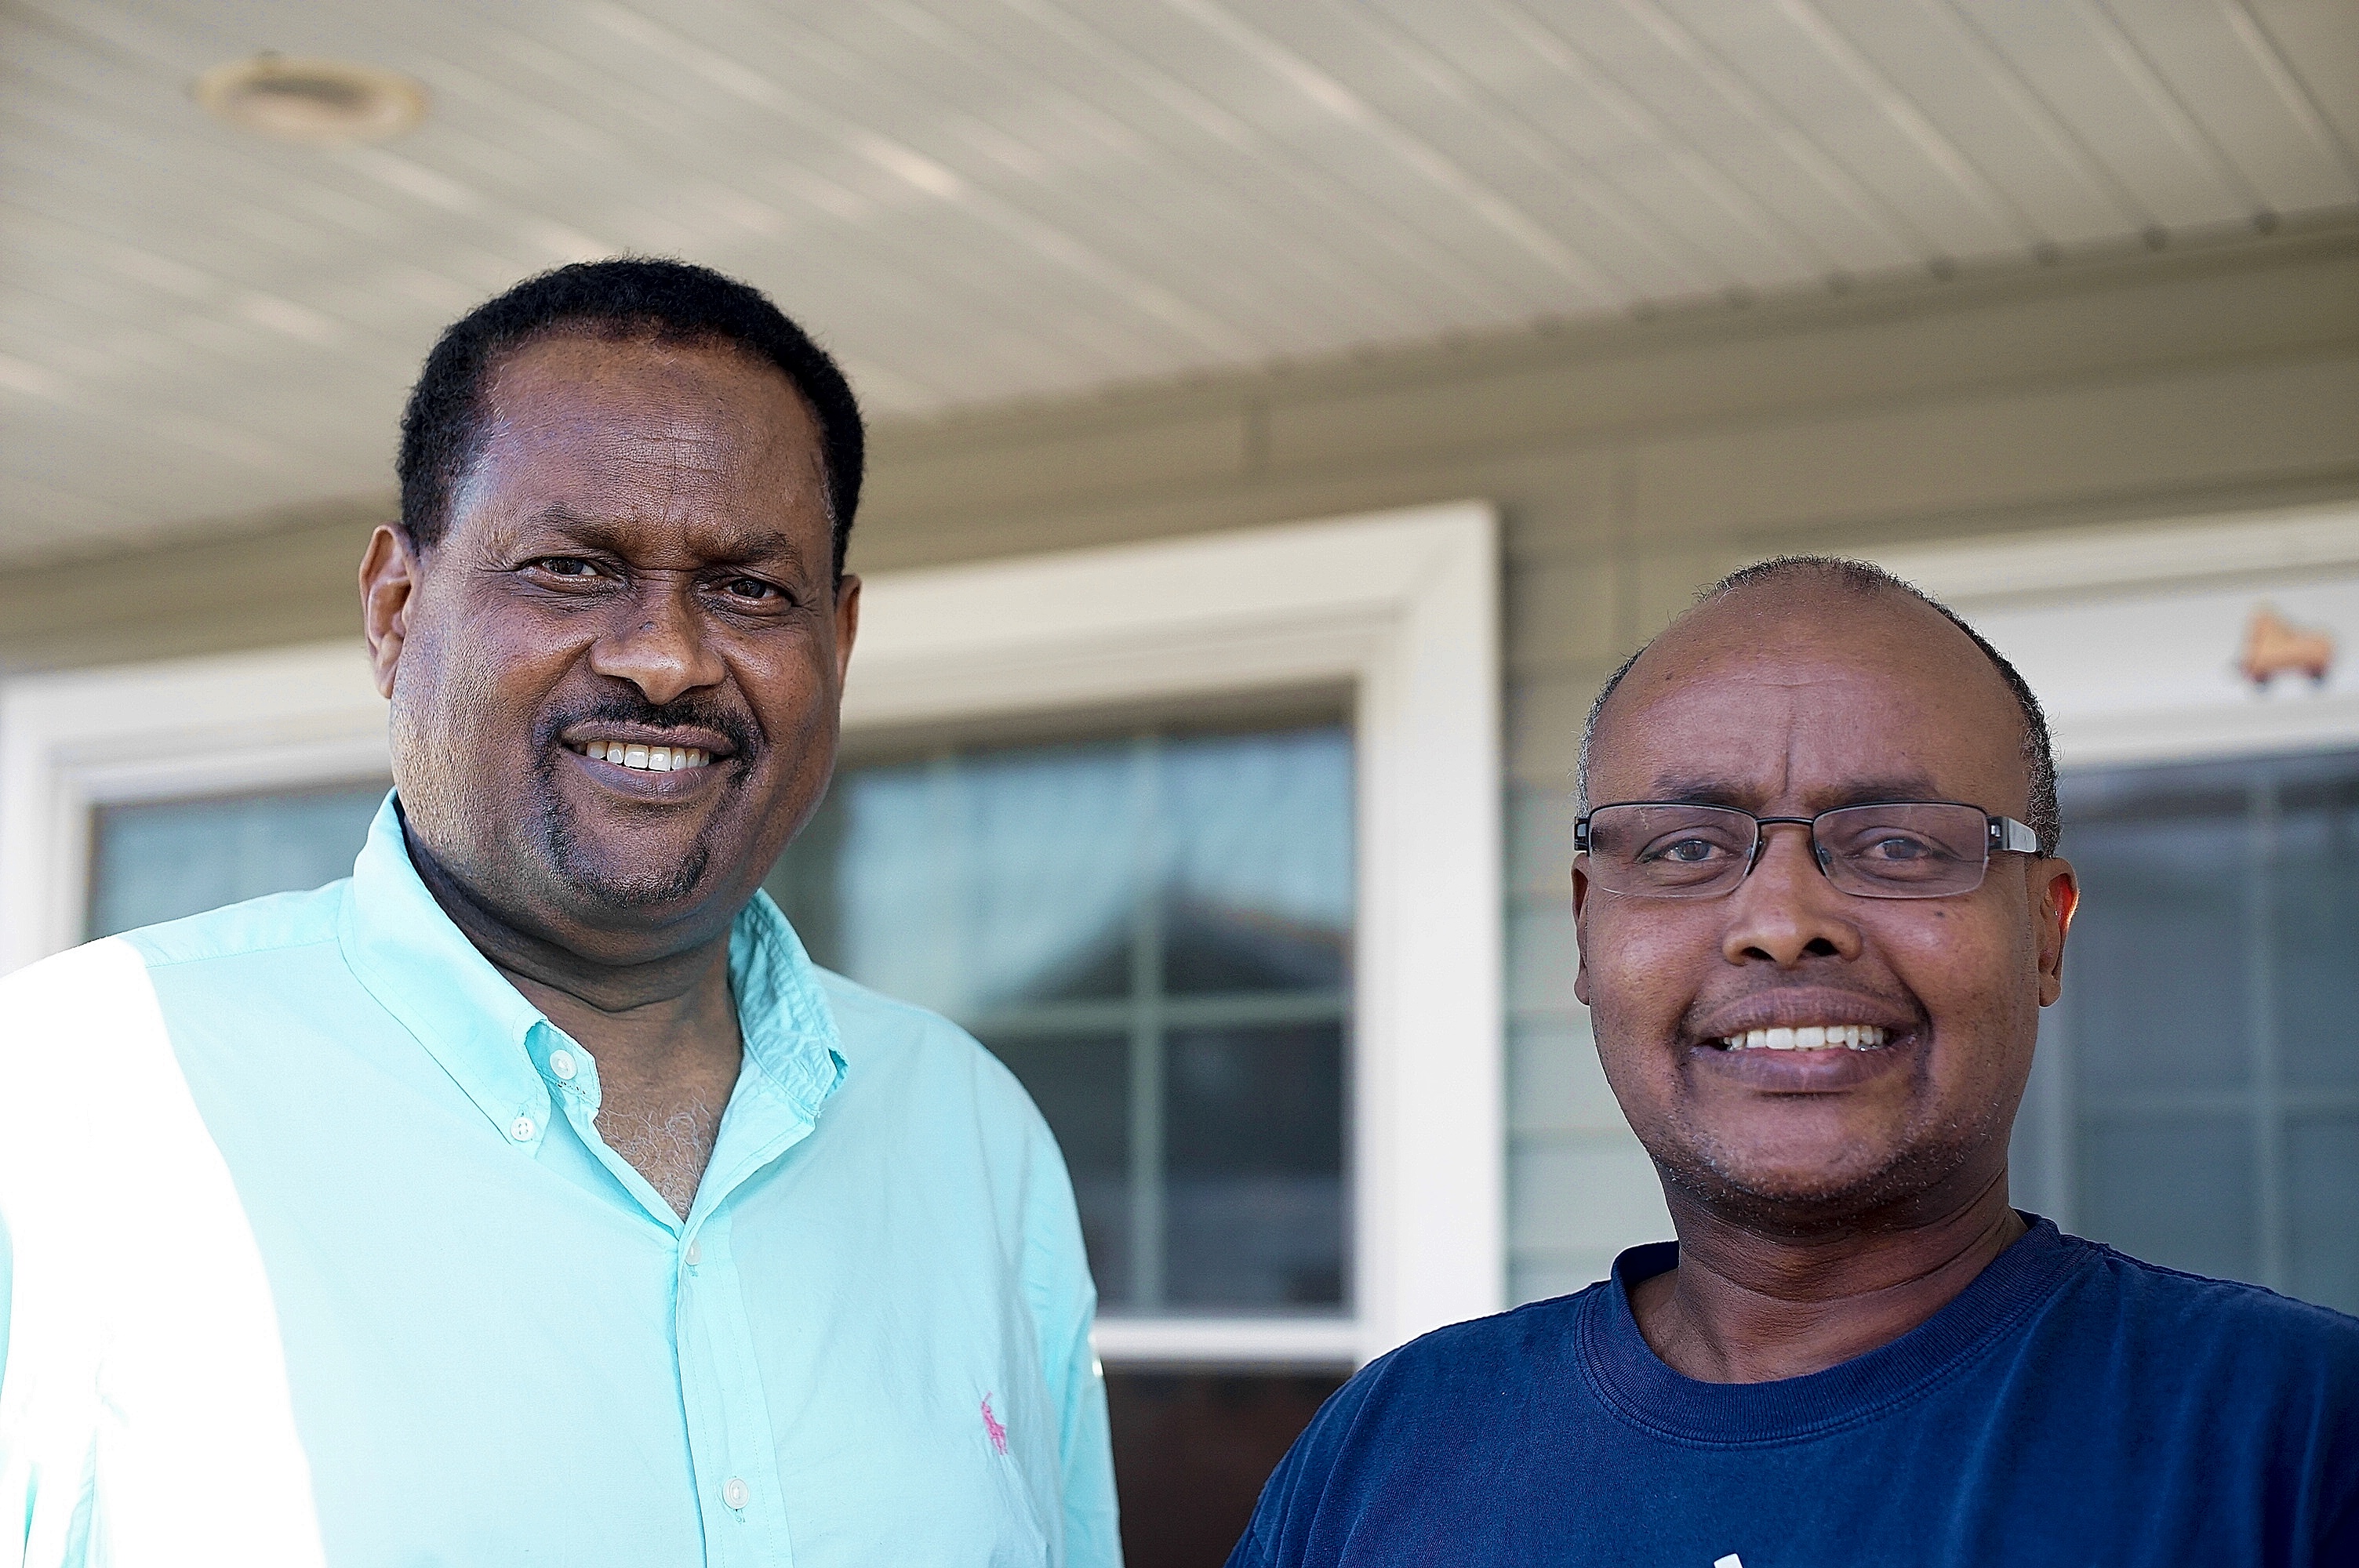 Neighbors Now and Then: Said and Dahir's Story